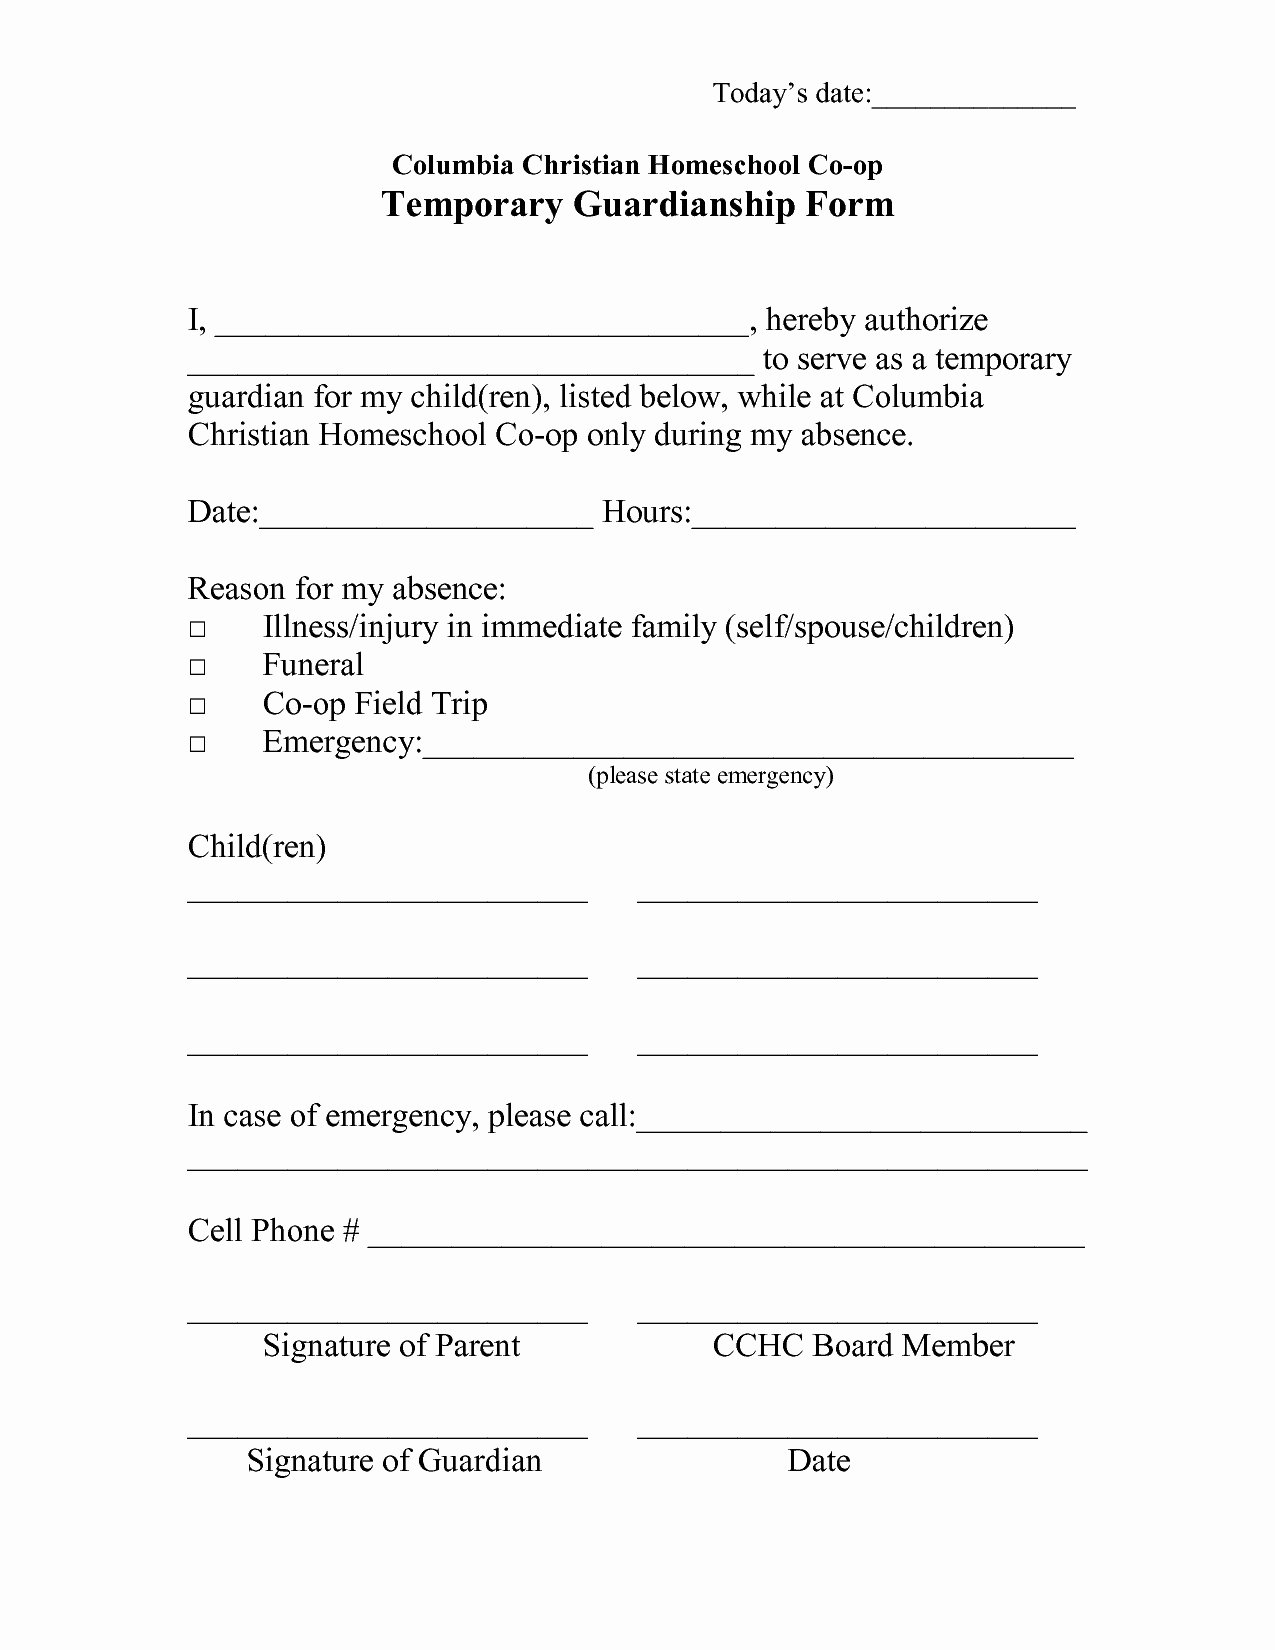 Free Temporary Guardianship form Template New Temporary Guardianship Letter Template Samples